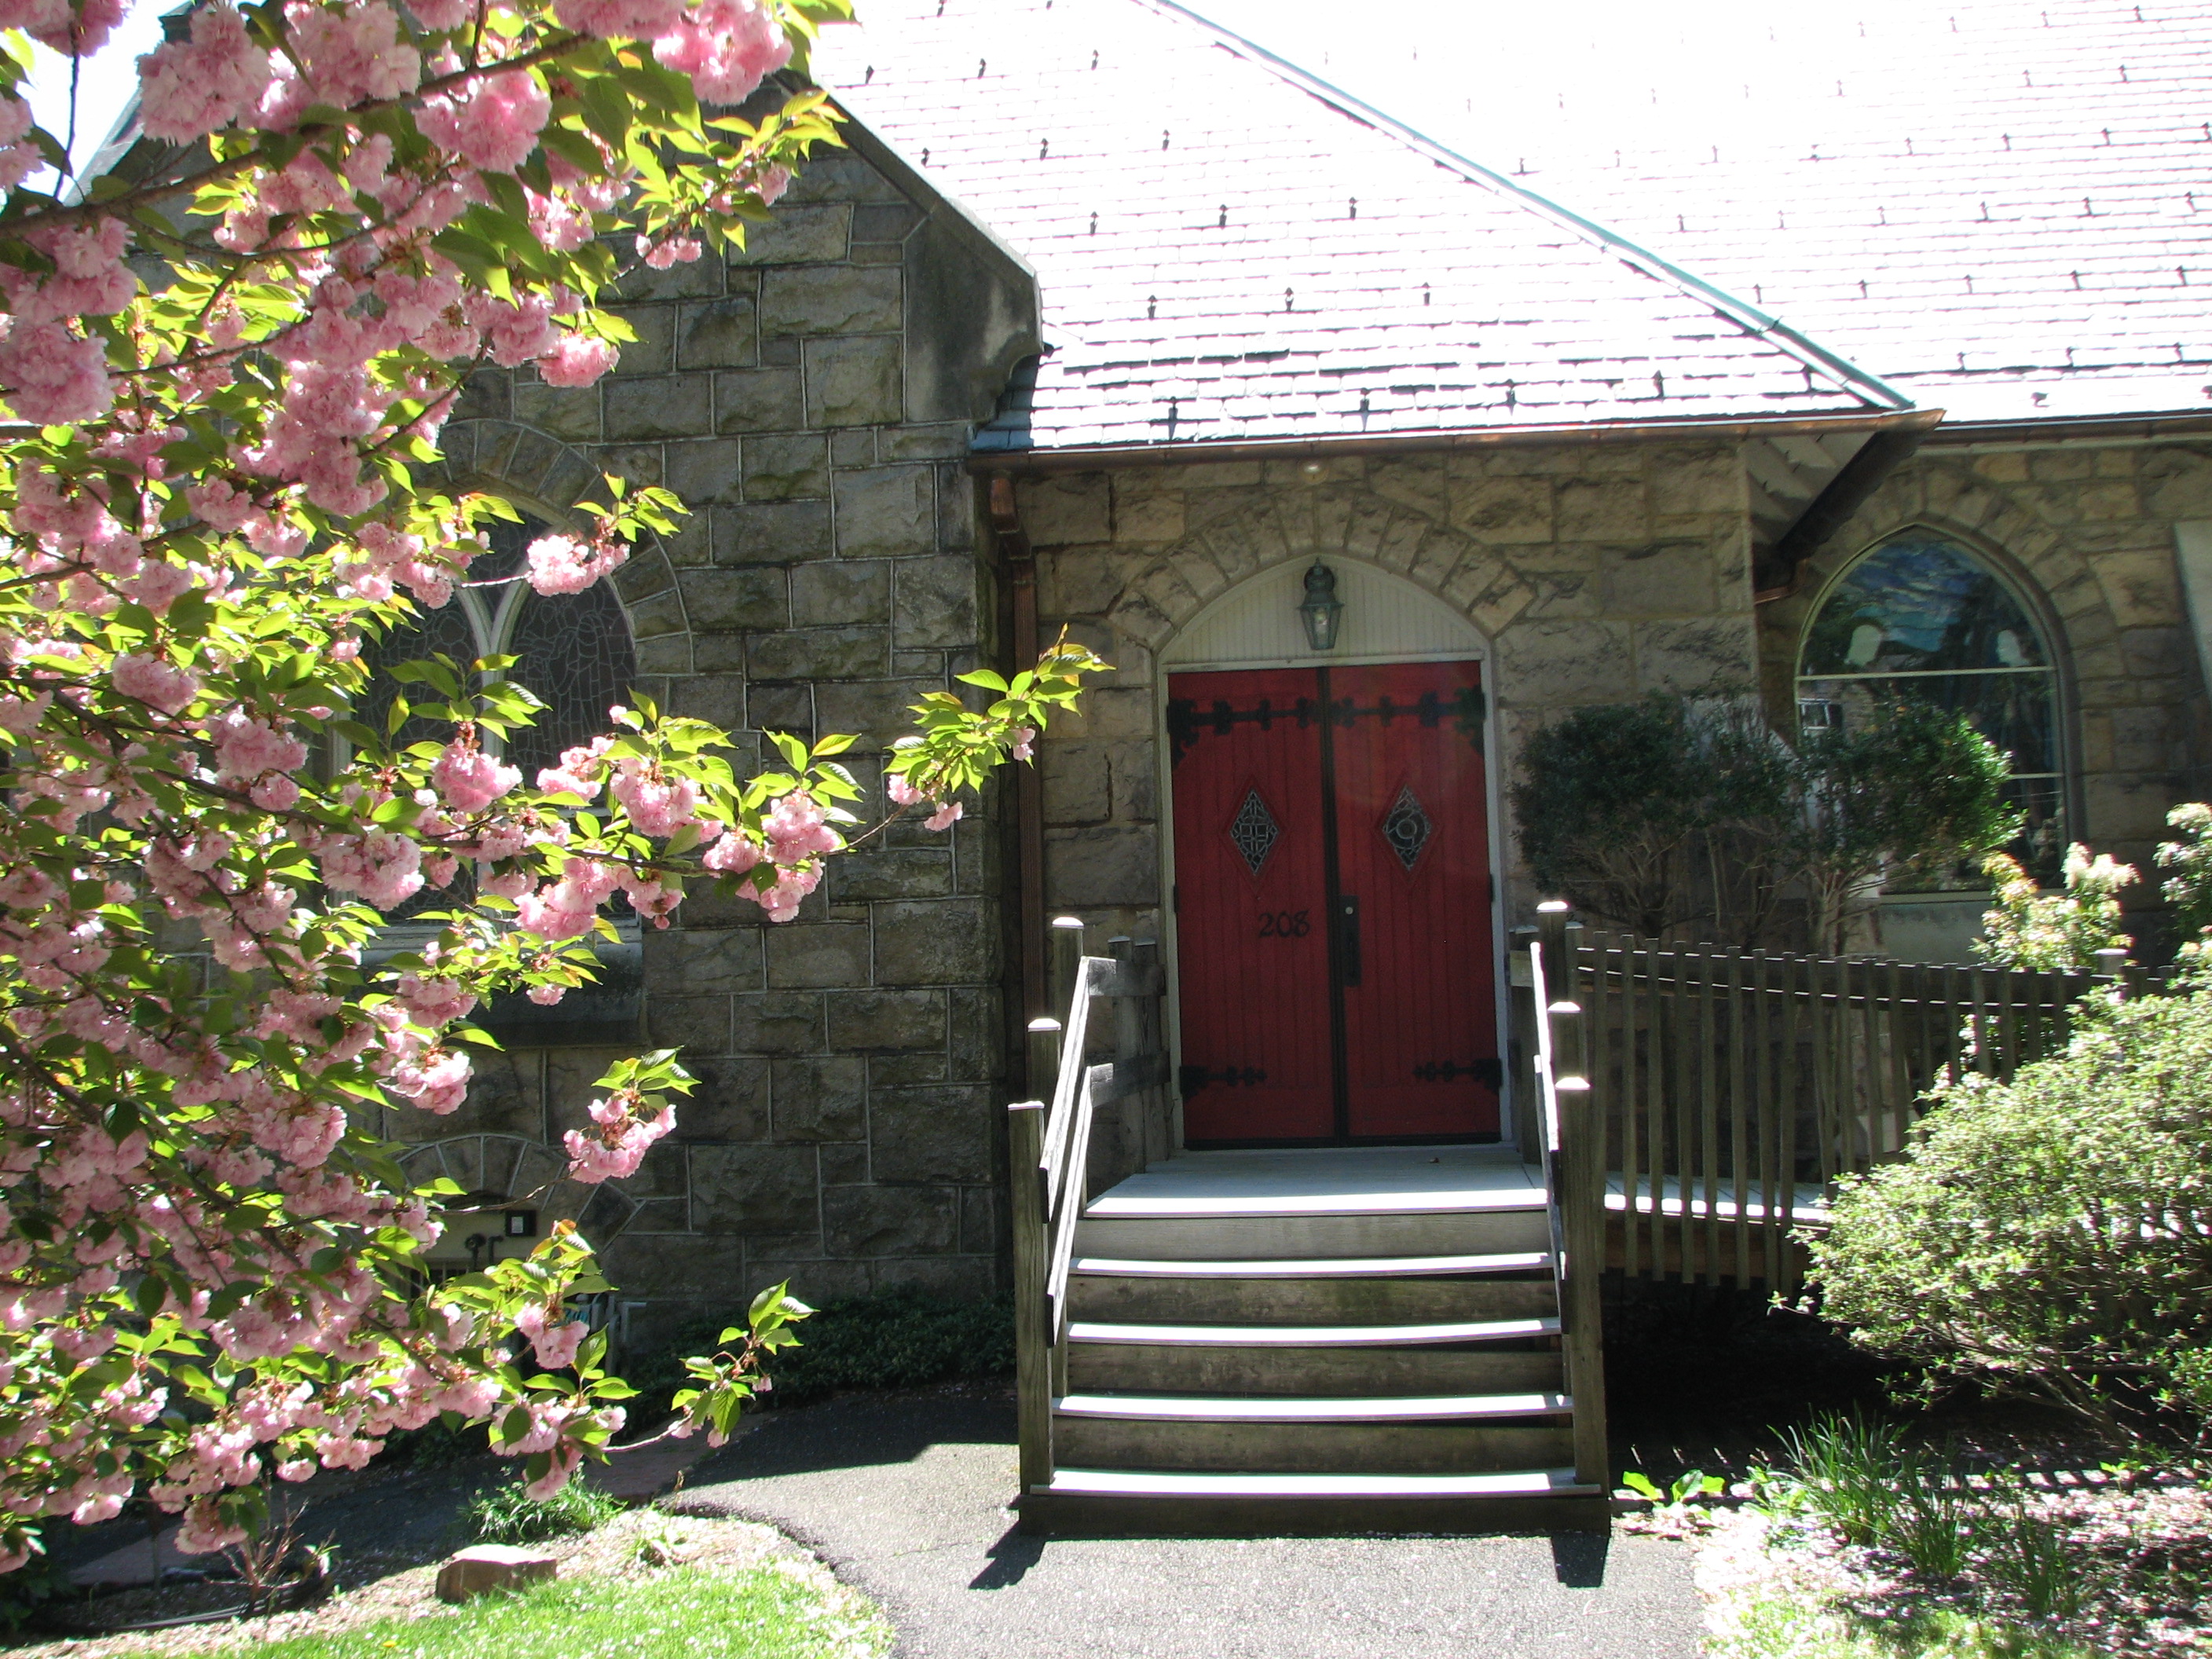 The side entrance to All Hallows.